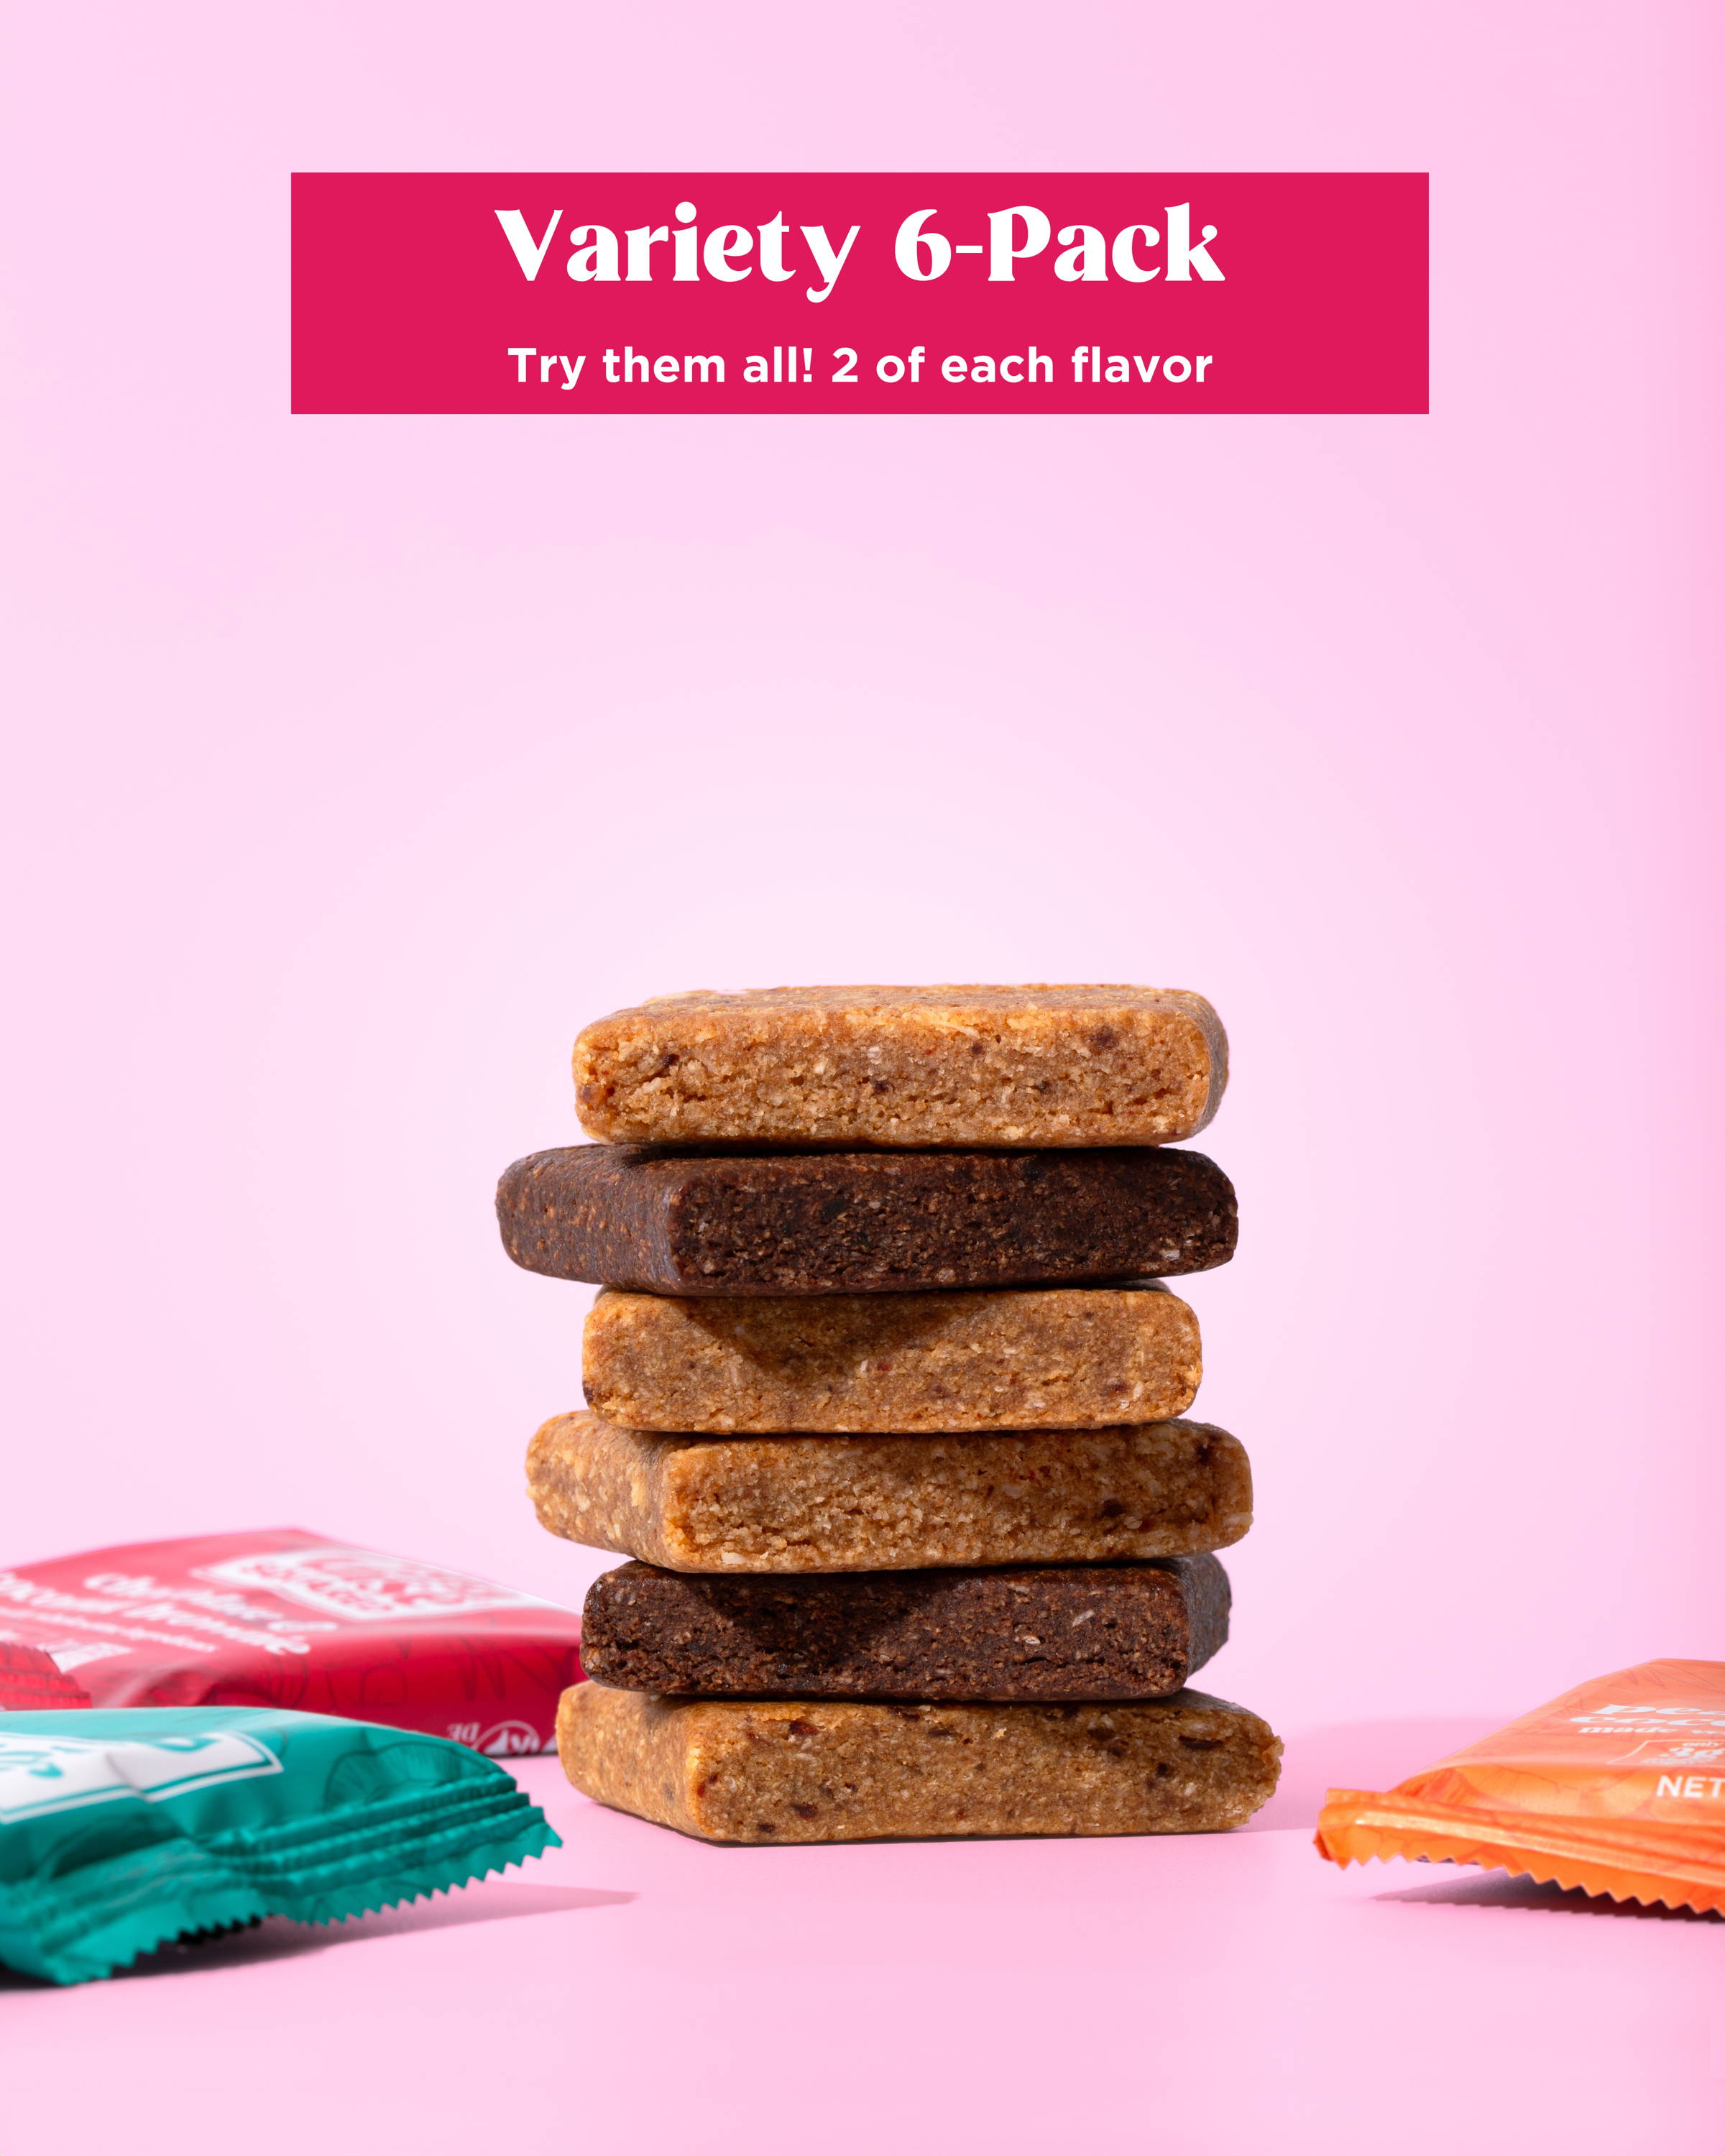 Variety 6-Pack Try them all! 2 of each flavor